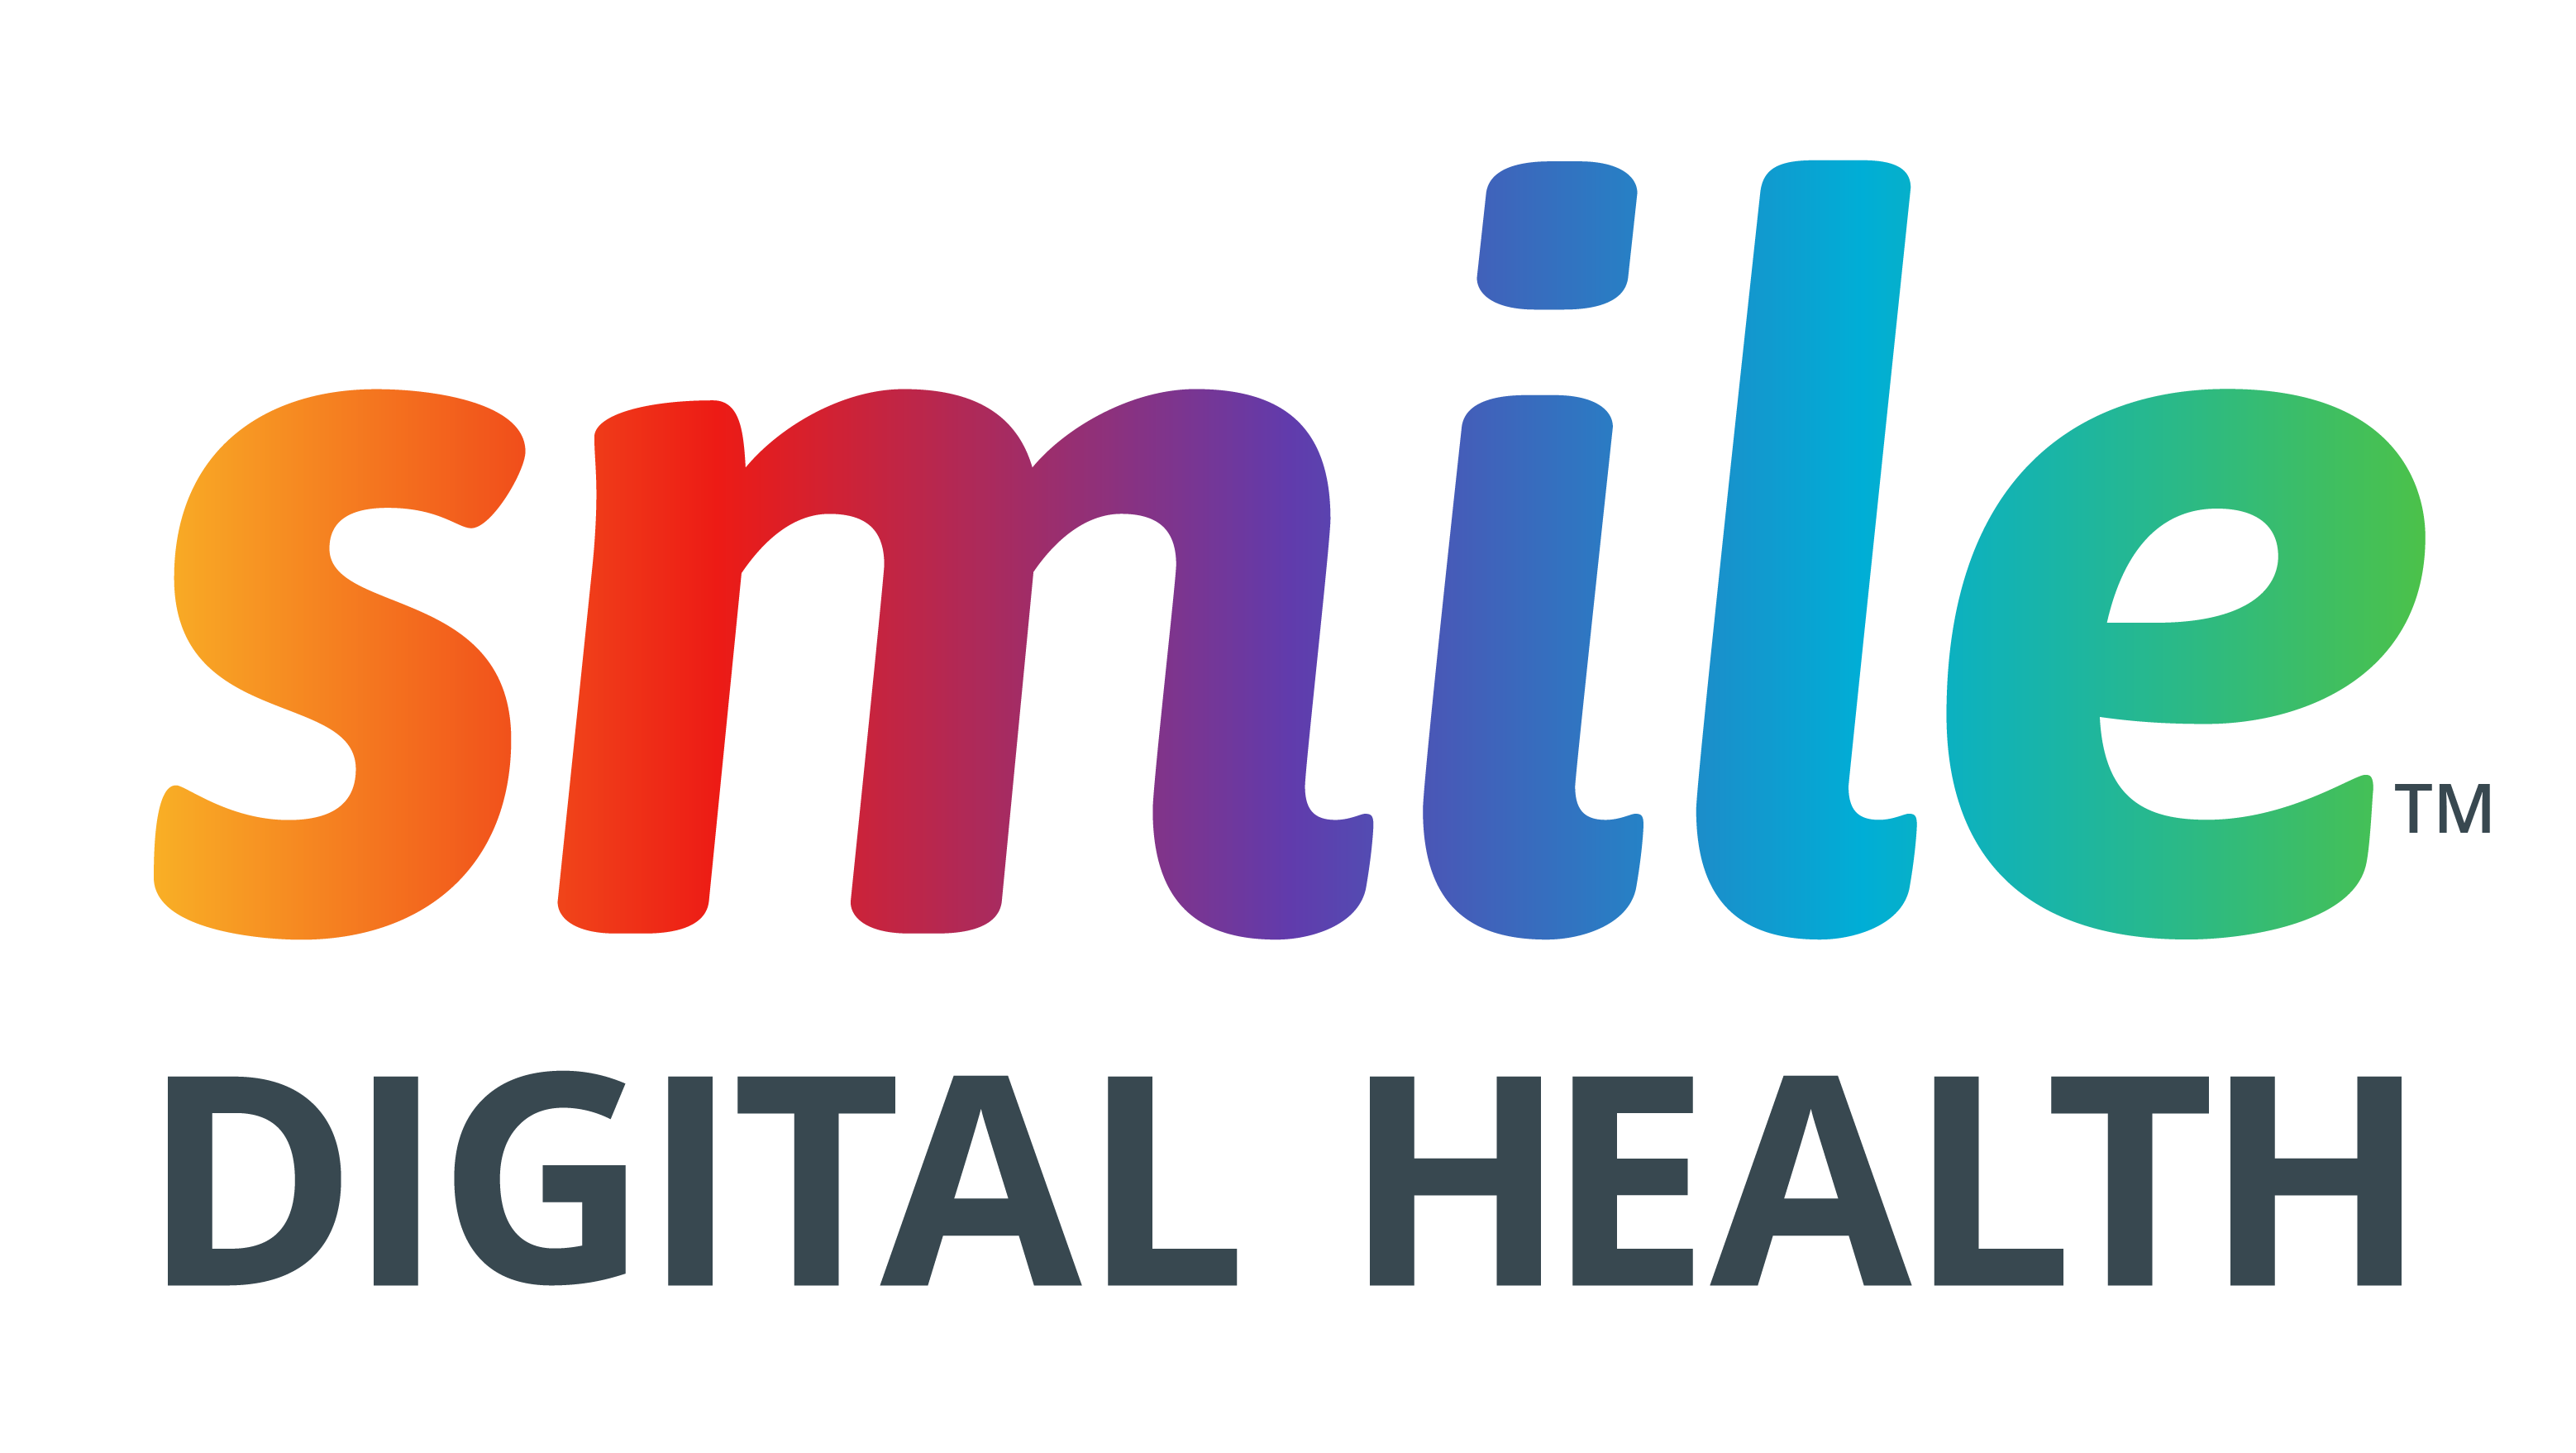 Featured Image for Smile CDR Inc. (doing business as Smile Digital Health)